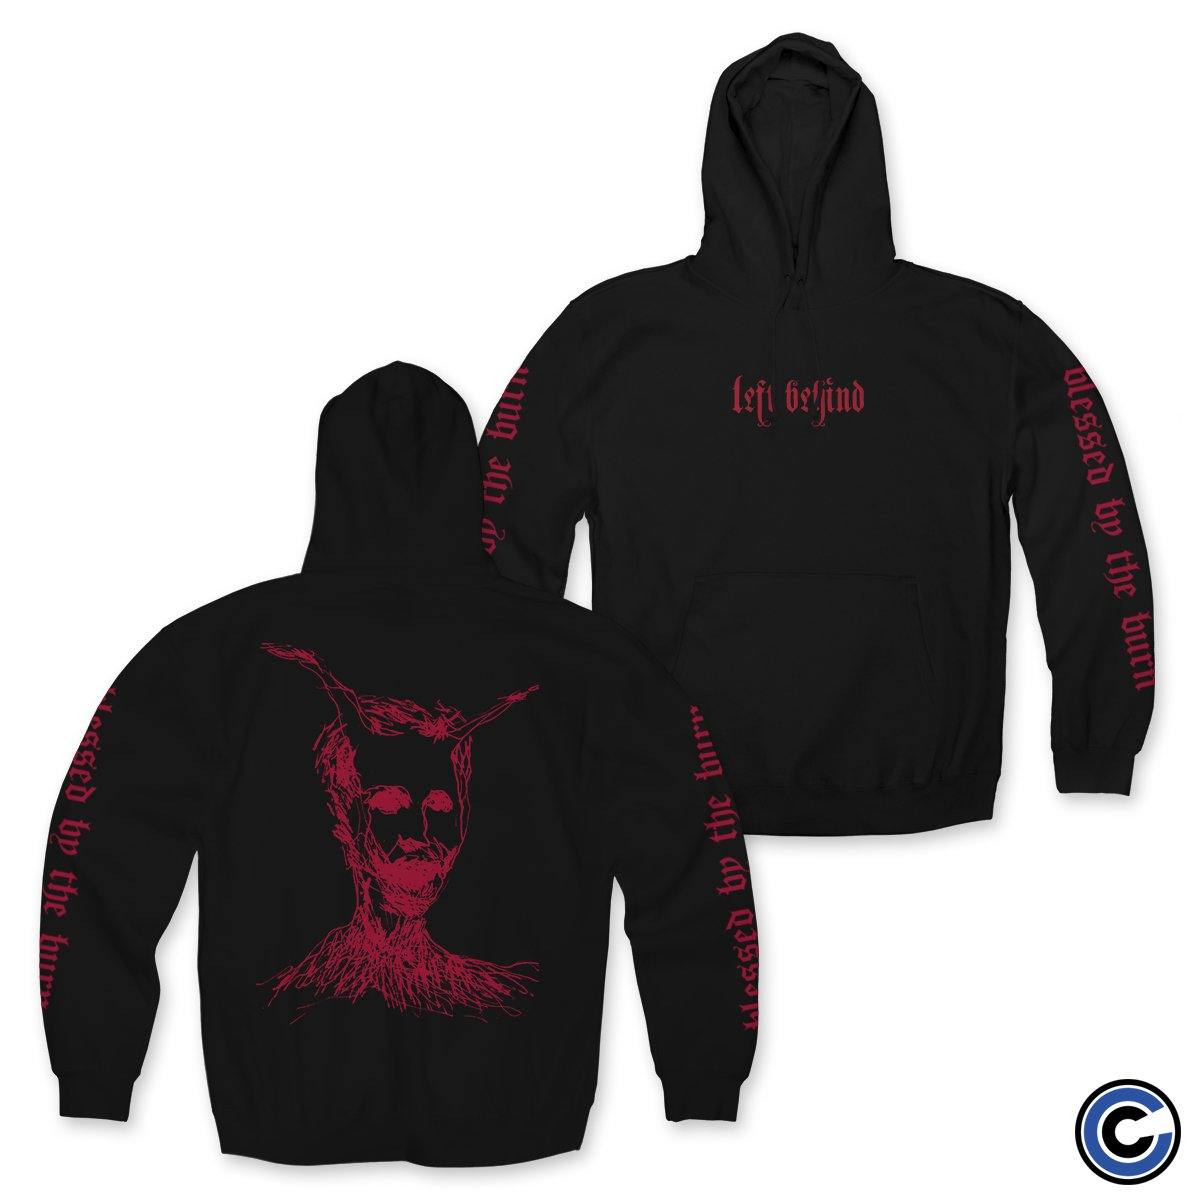 Buy – Left Behind "Horned Drawing" Hoodie – Band & Music Merch – Cold Cuts Merch